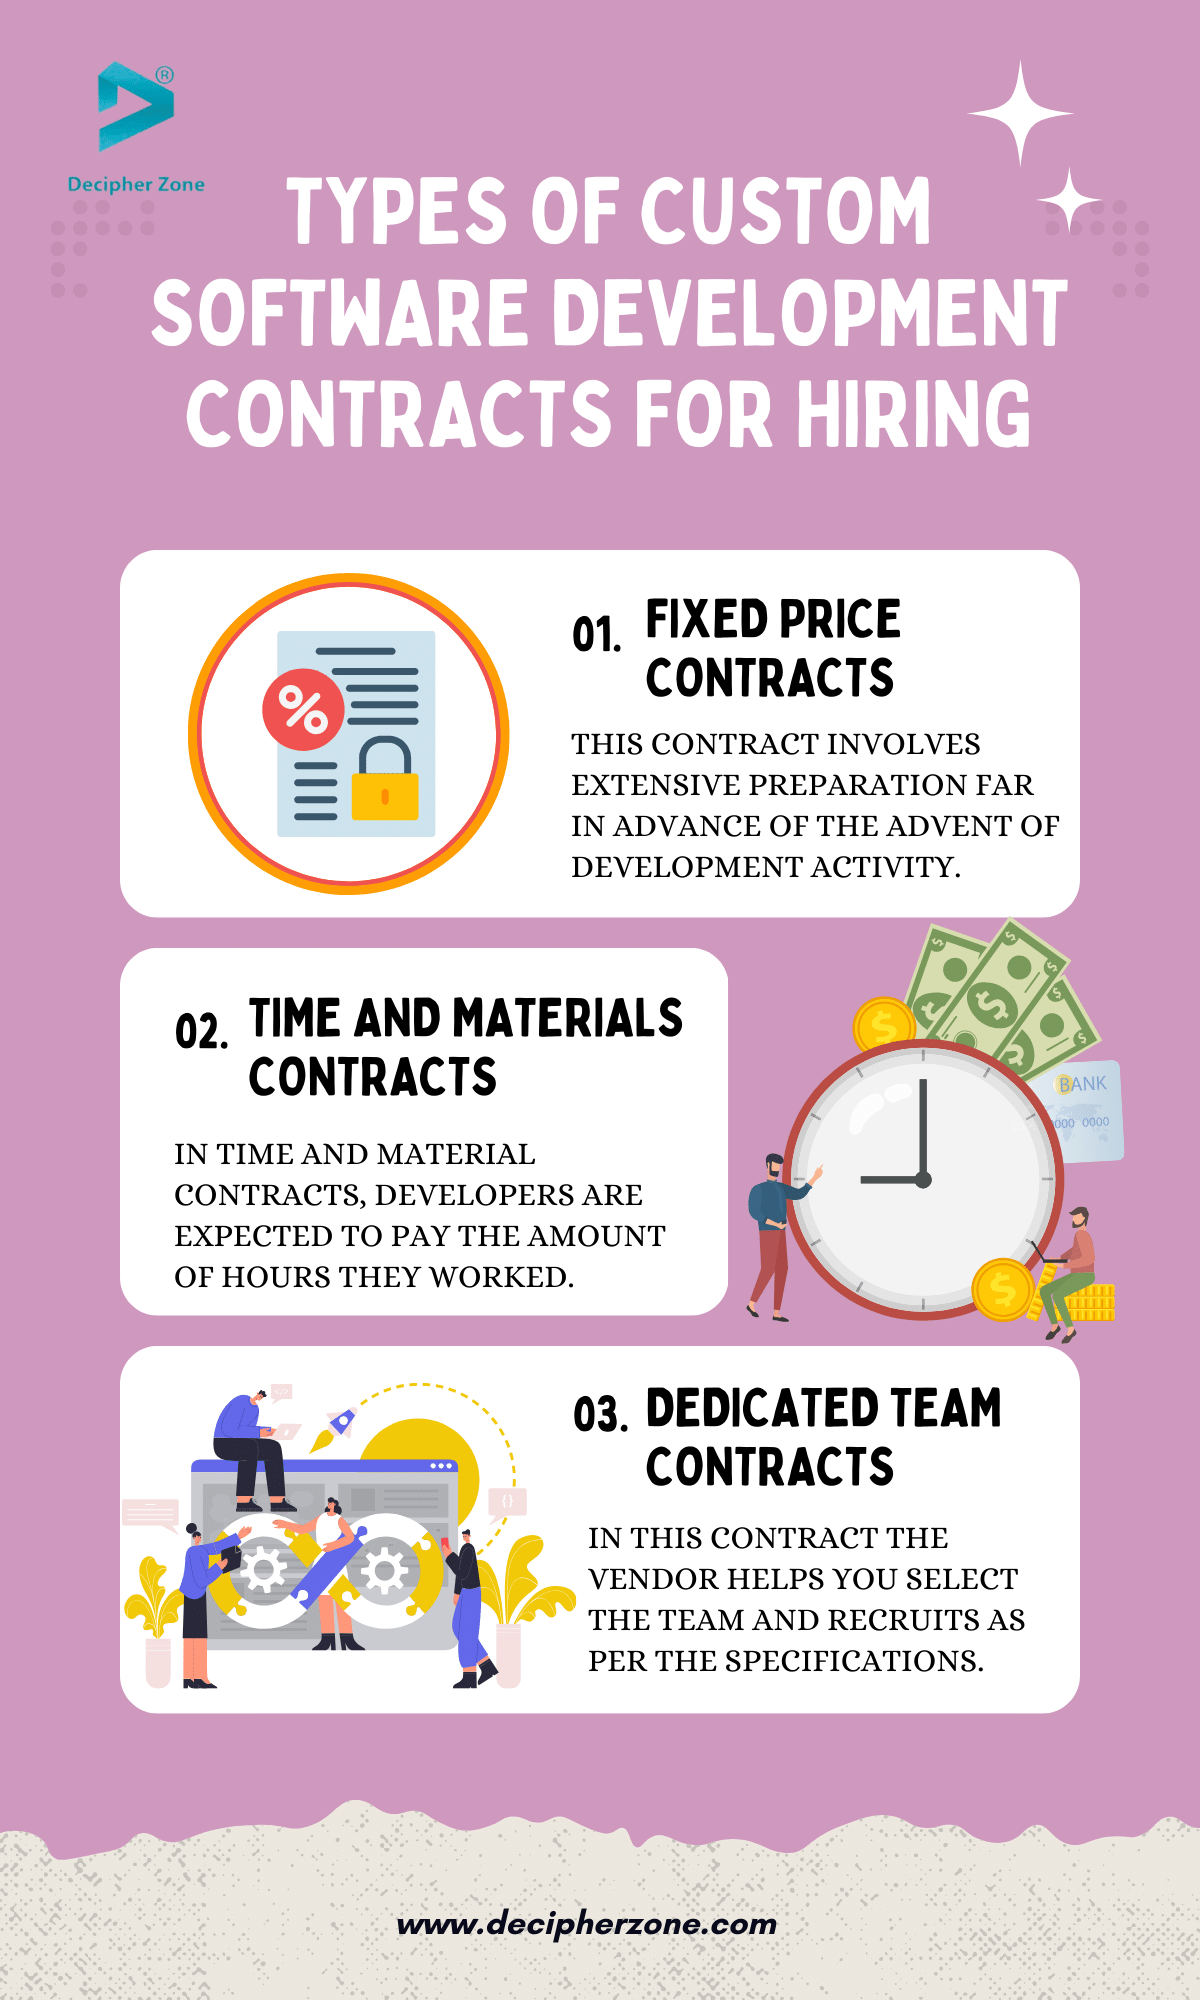 Types of Custom Software Development Contracts for Hiring